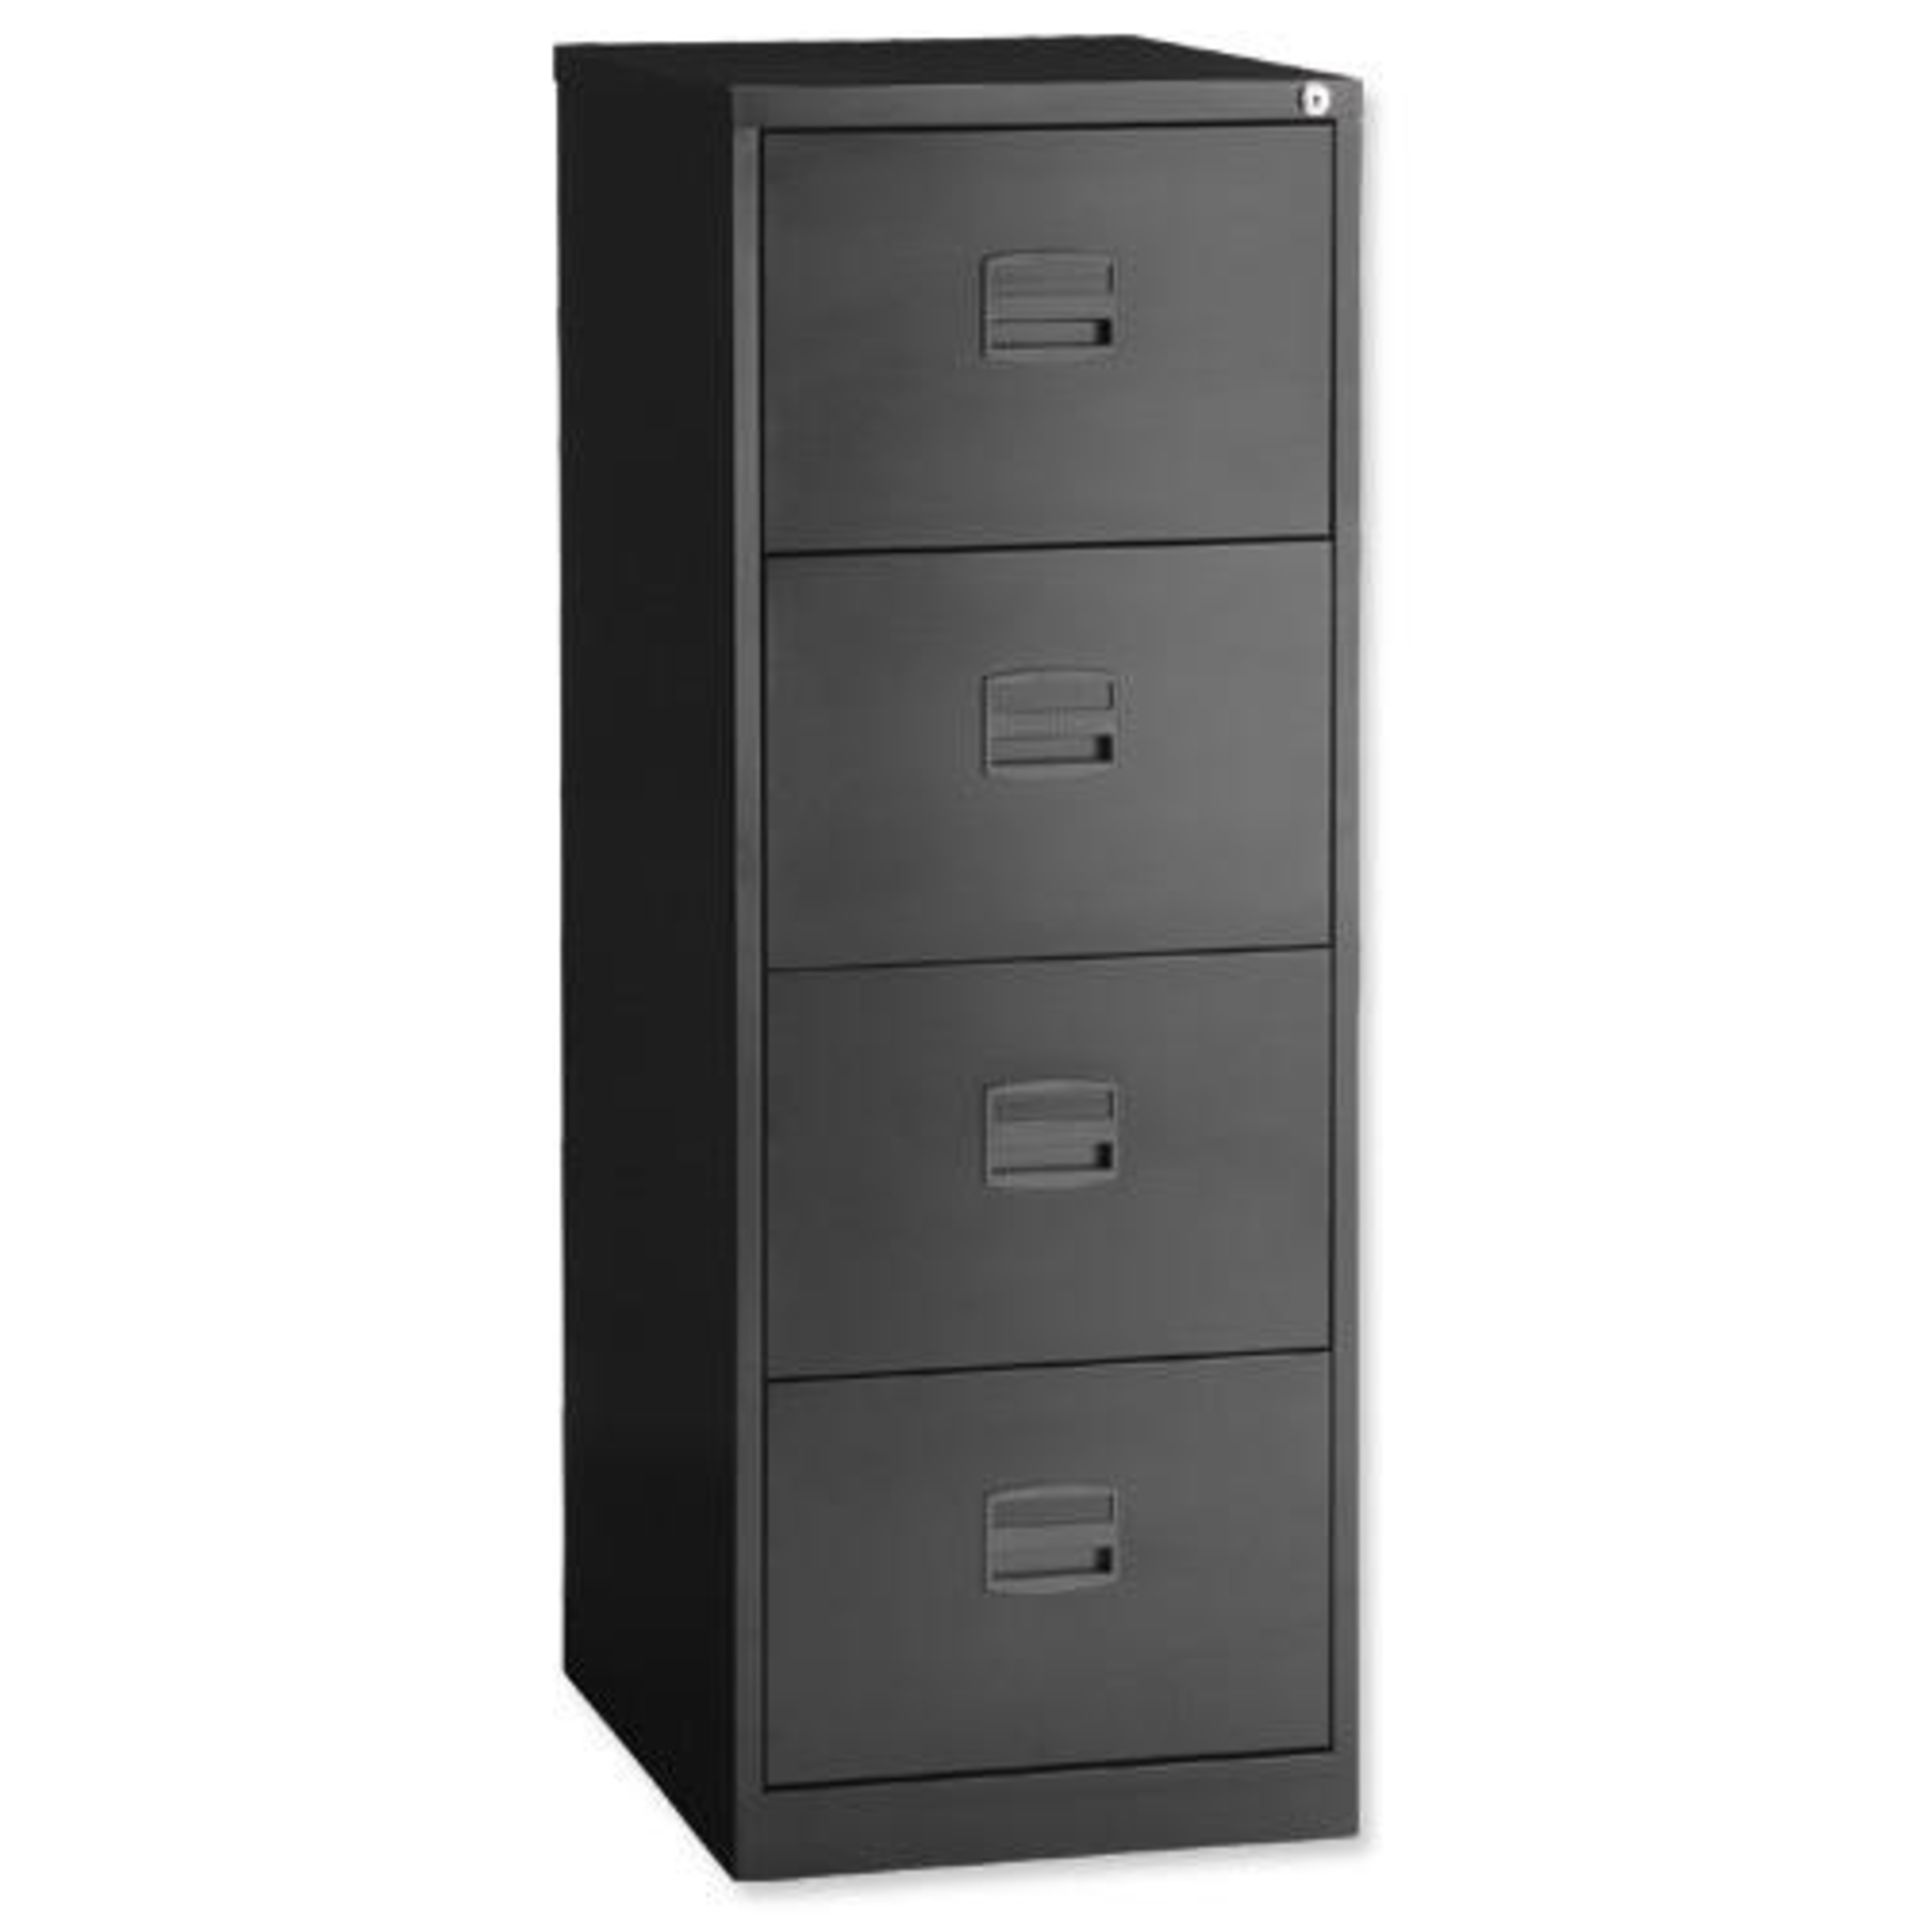 1 GRADE A PACKAGED 4 DRAWER FILING CABINET IN DARK GREY / RRP £161.00 (VIEWING HIGHLY RECOMMENDED)